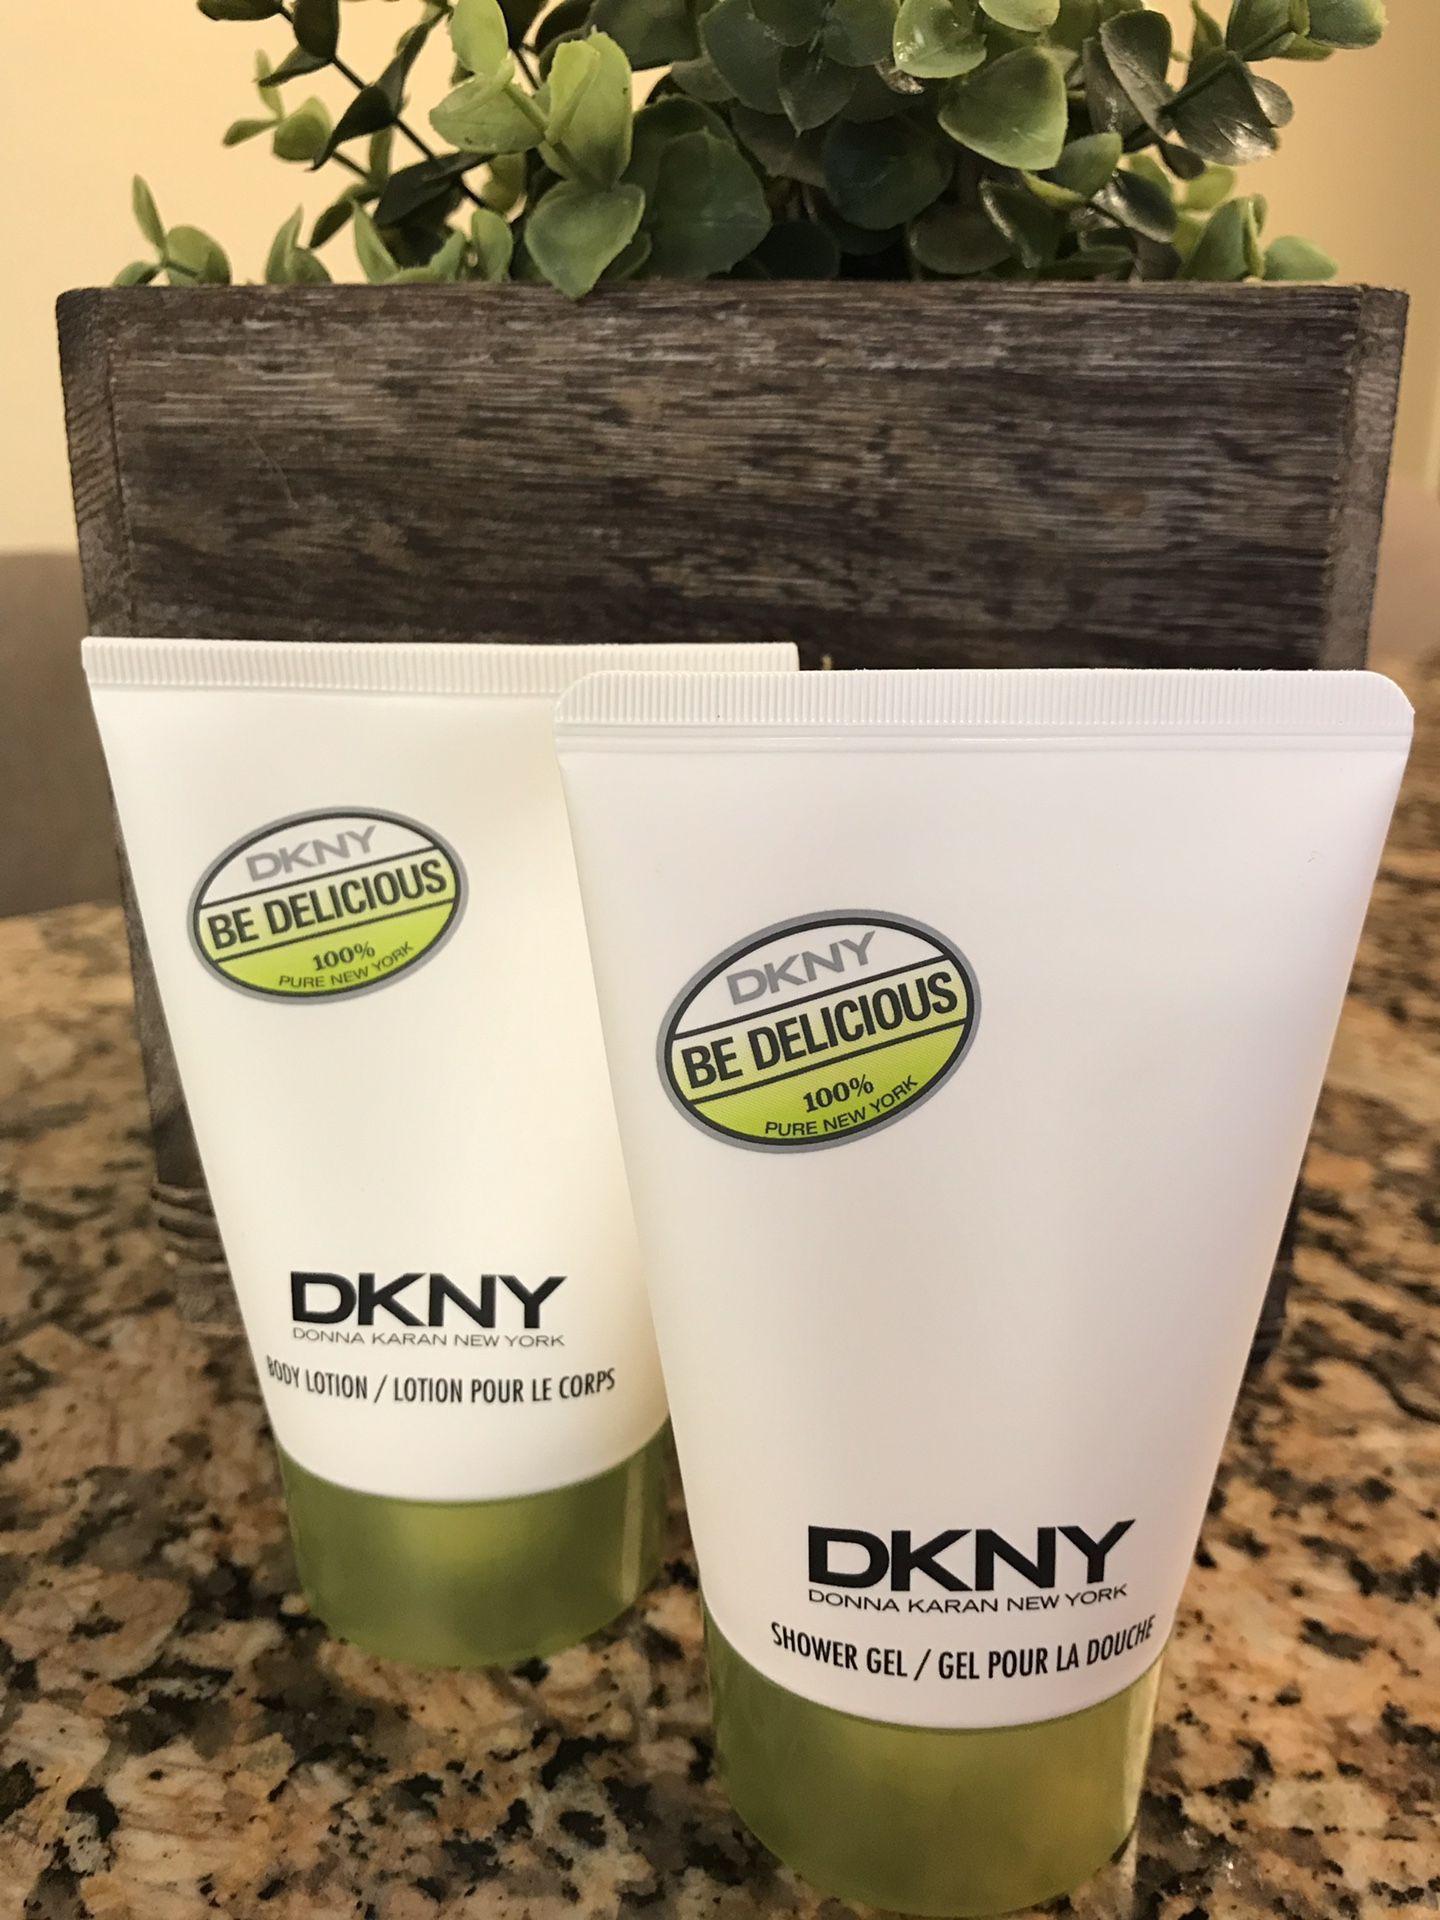 DKNY Shower Gel and Body Lotion